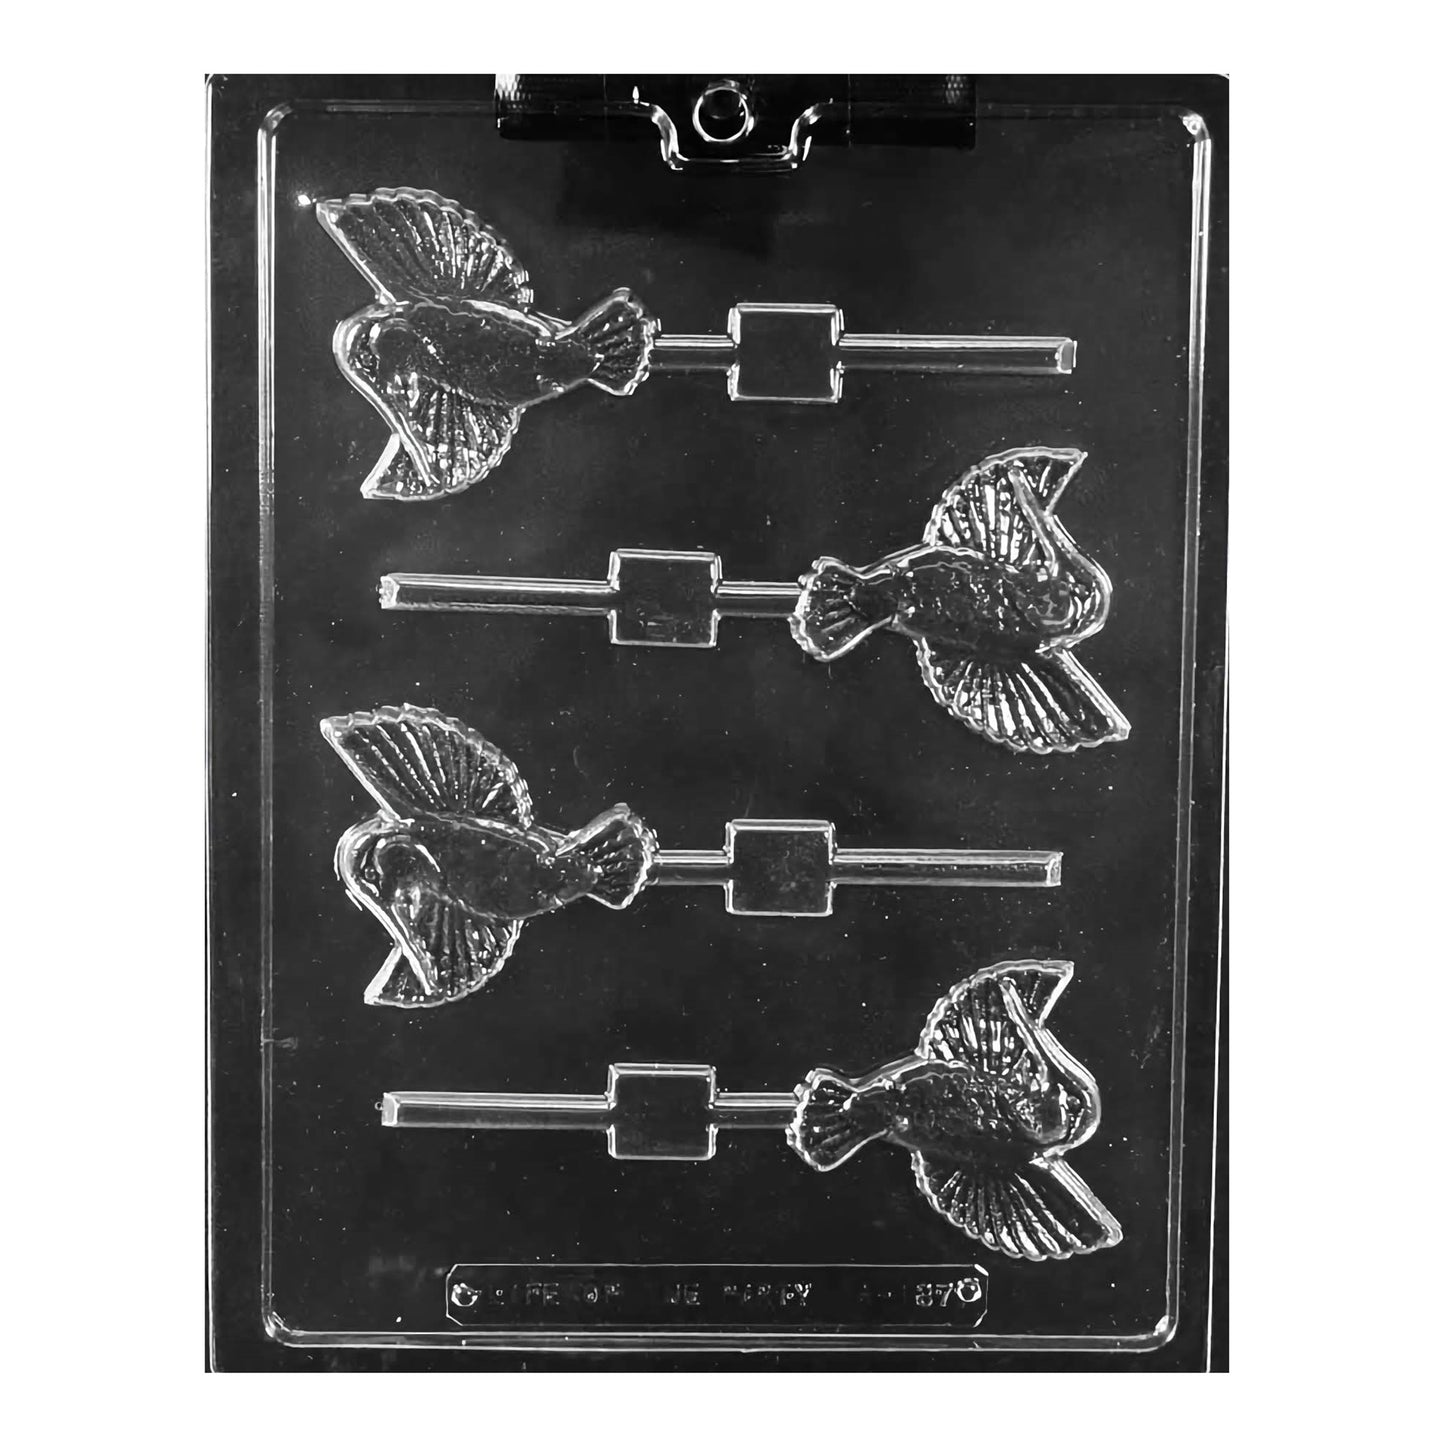 Intricately detailed Hummingbird Chocolate Lollipop Mold capturing the exquisite features of a hummingbird in mid-hover with wings gracefully spread. The mold is ideal for nature enthusiasts, bird watchers' gatherings, or to add an elegant touch of wildlife to your chocolate creations.